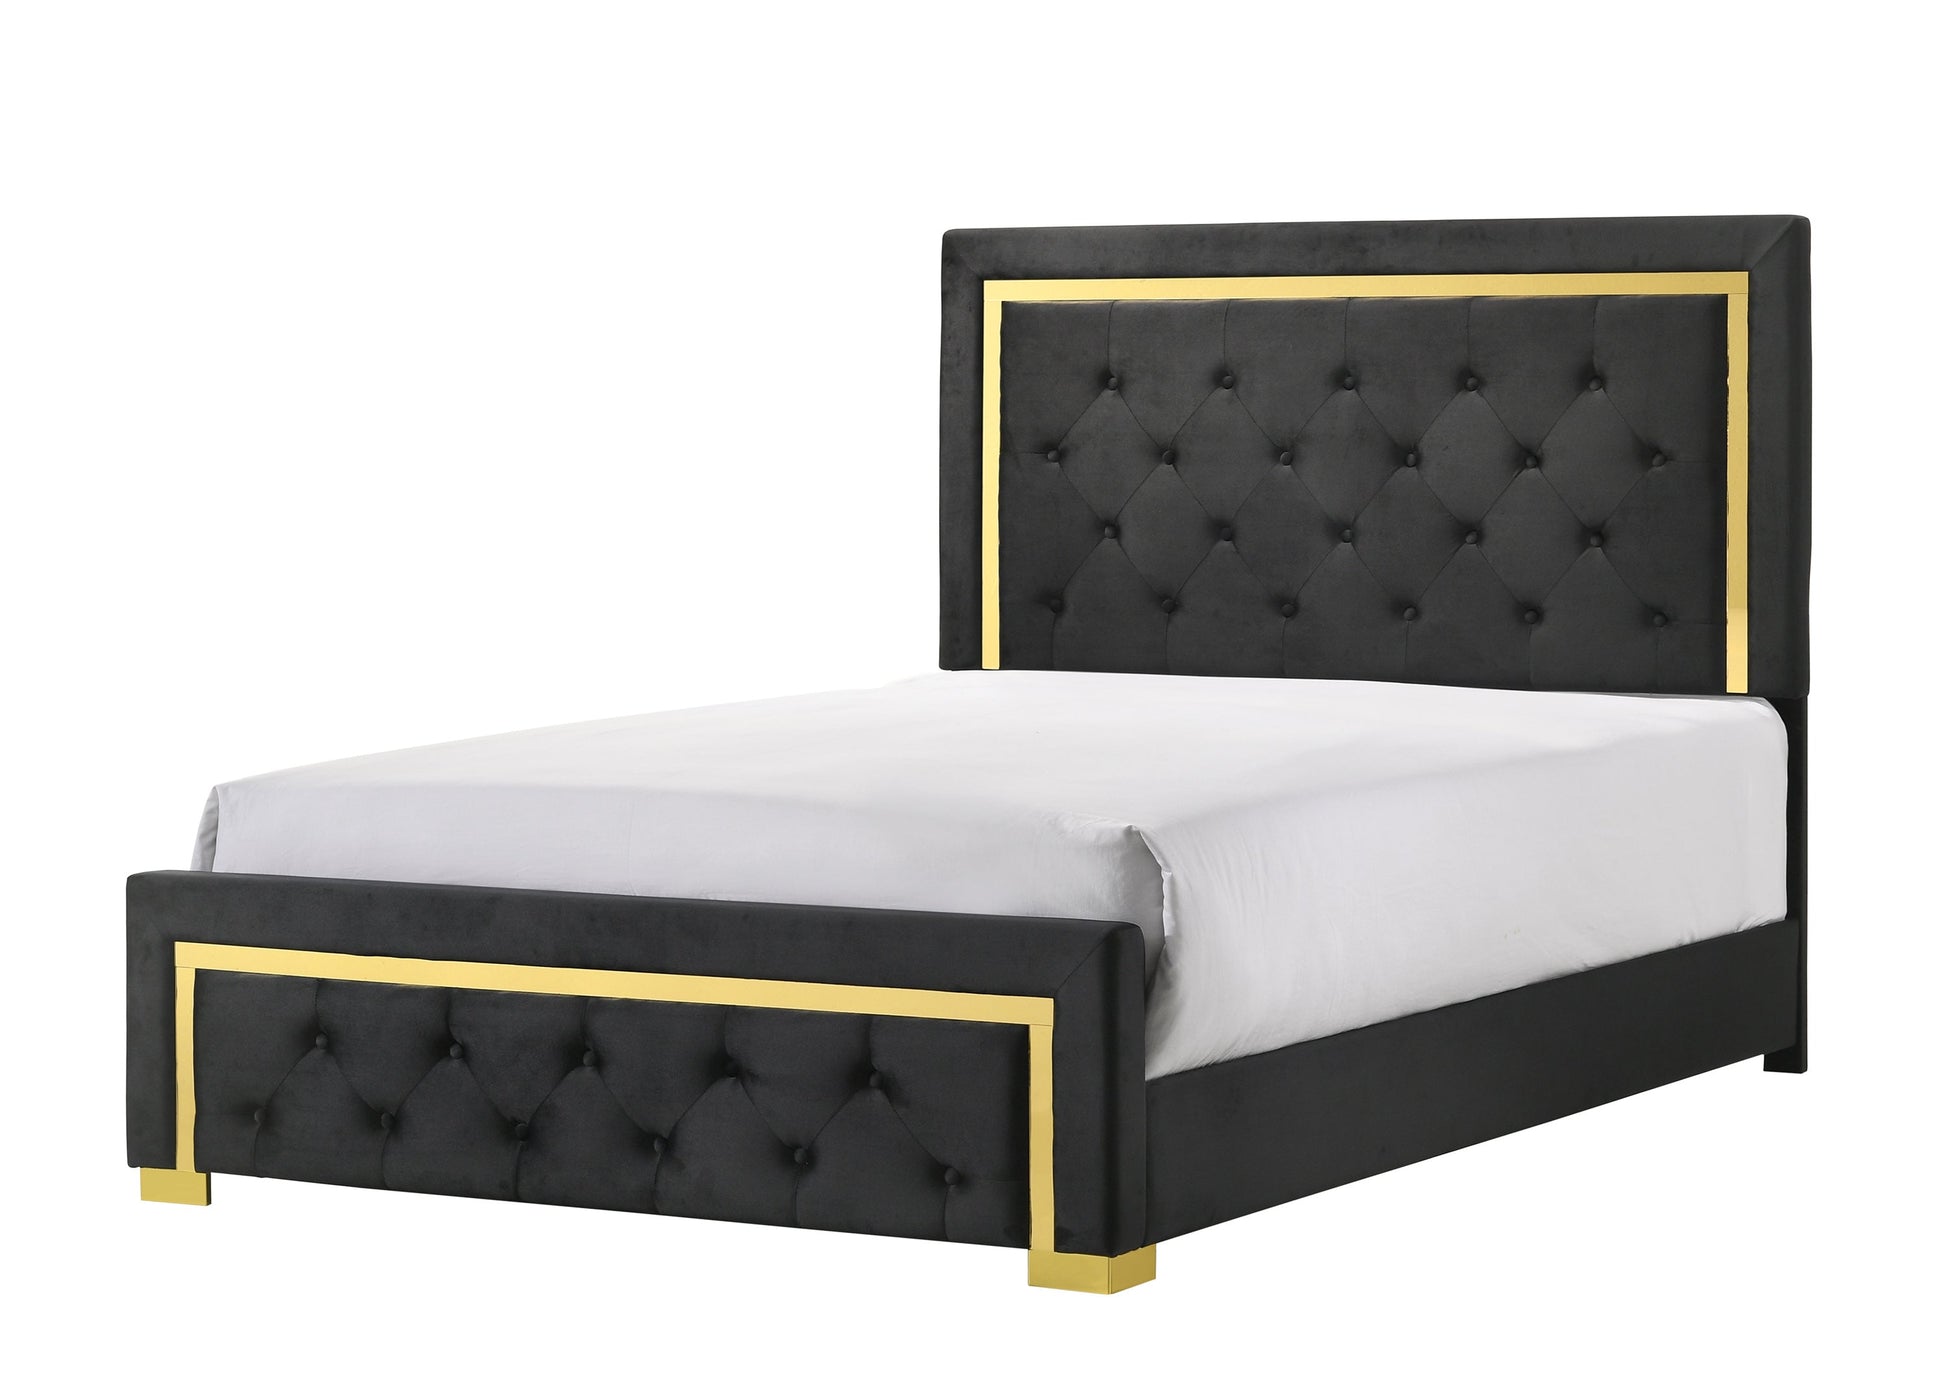 Pepe Black Sleek And Modern Contemporary Fabric Upholstered Tufted Panel Bedroom Set